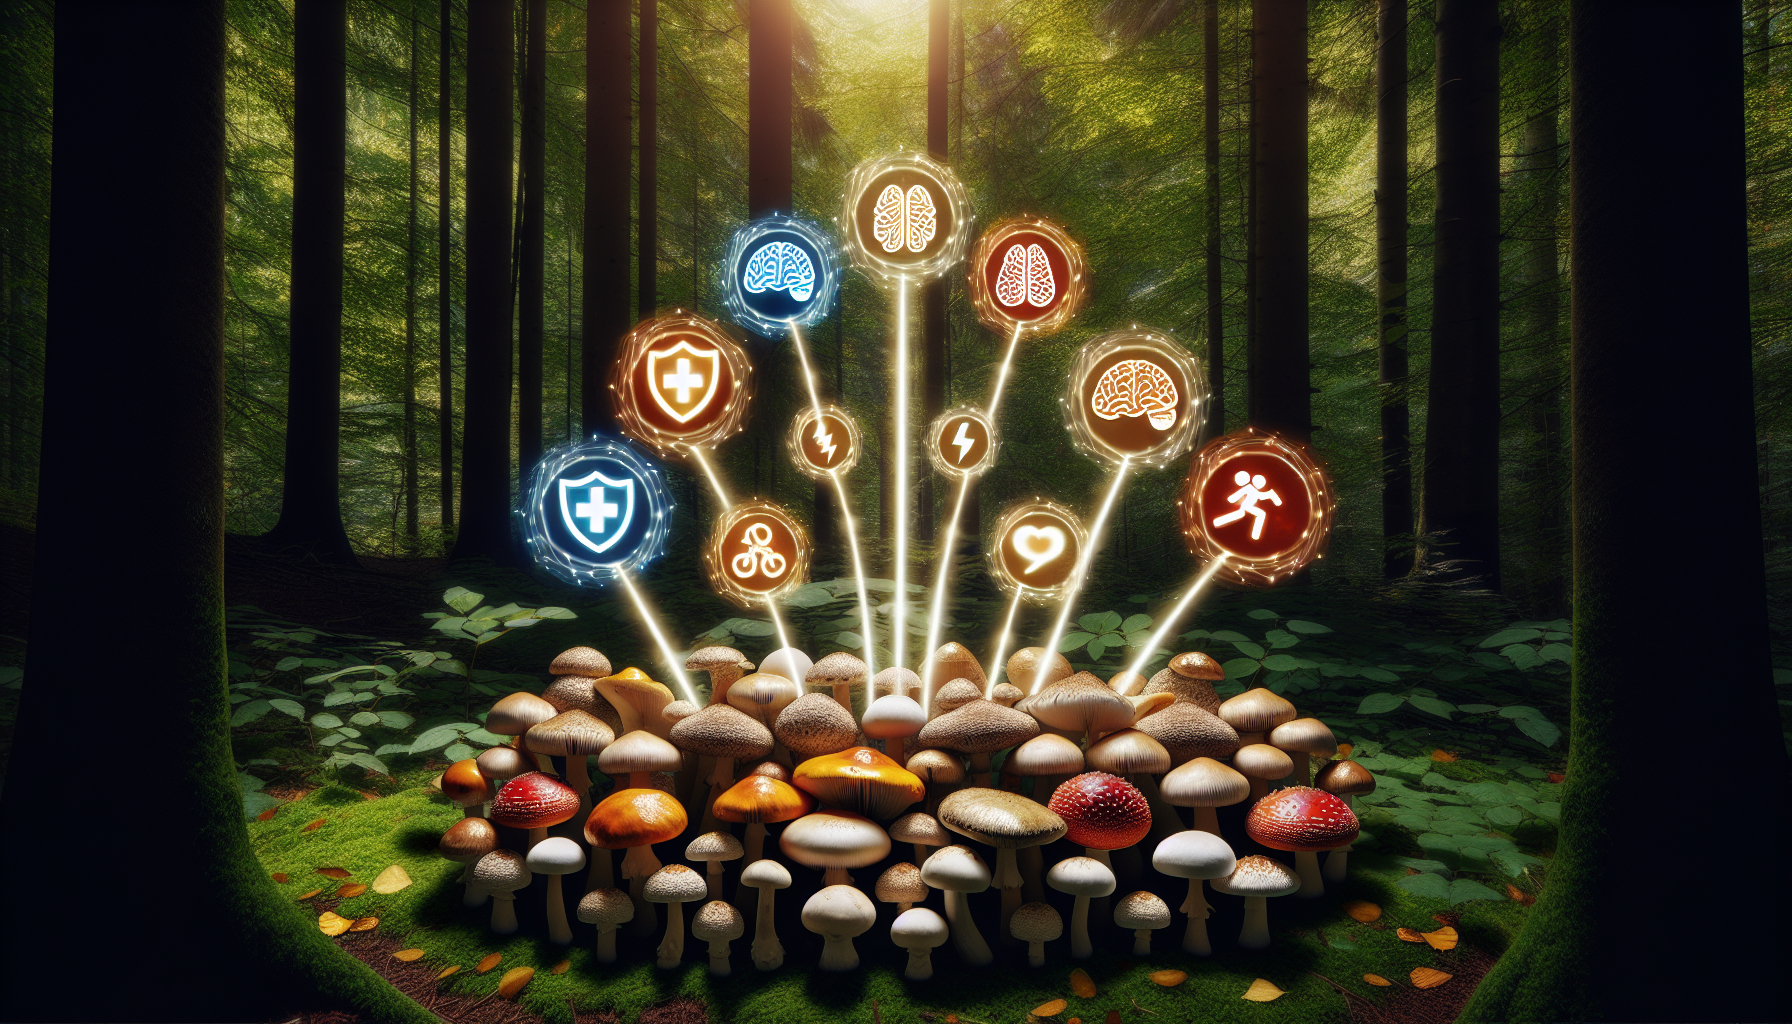 Functional mushrooms with health-related icons